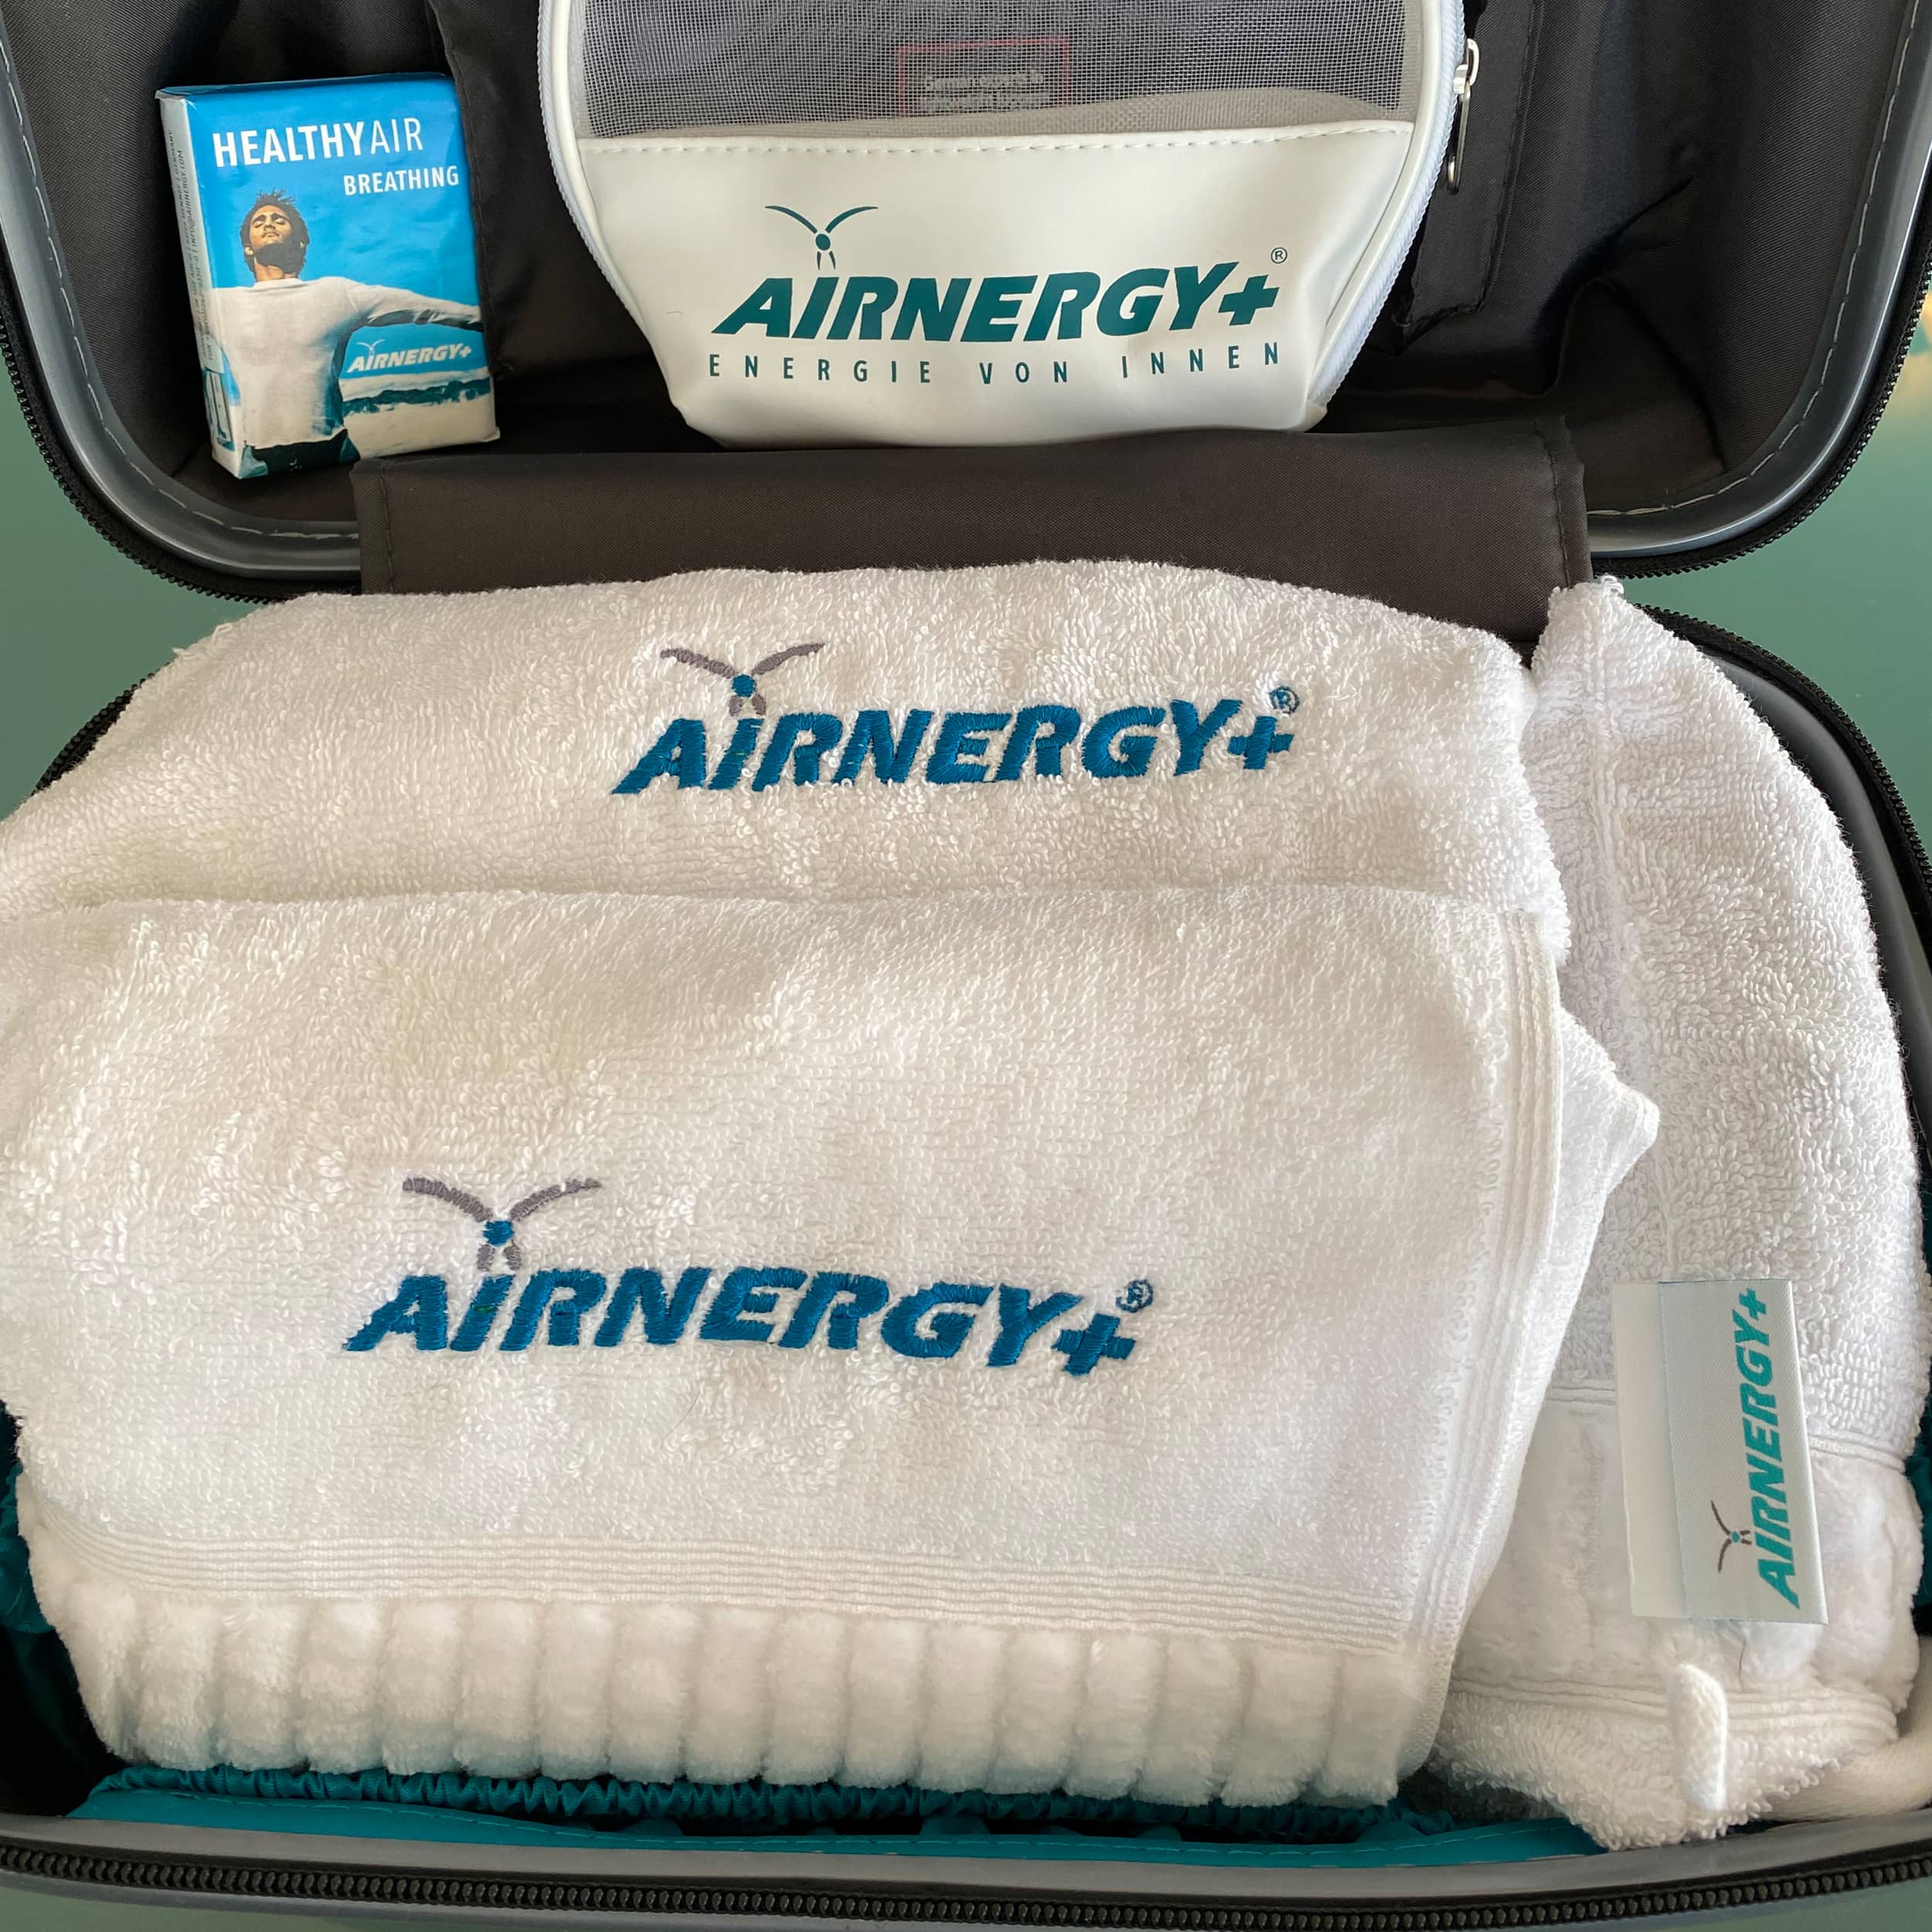 AIRNERGY Little Atmos and accessories in suitcase